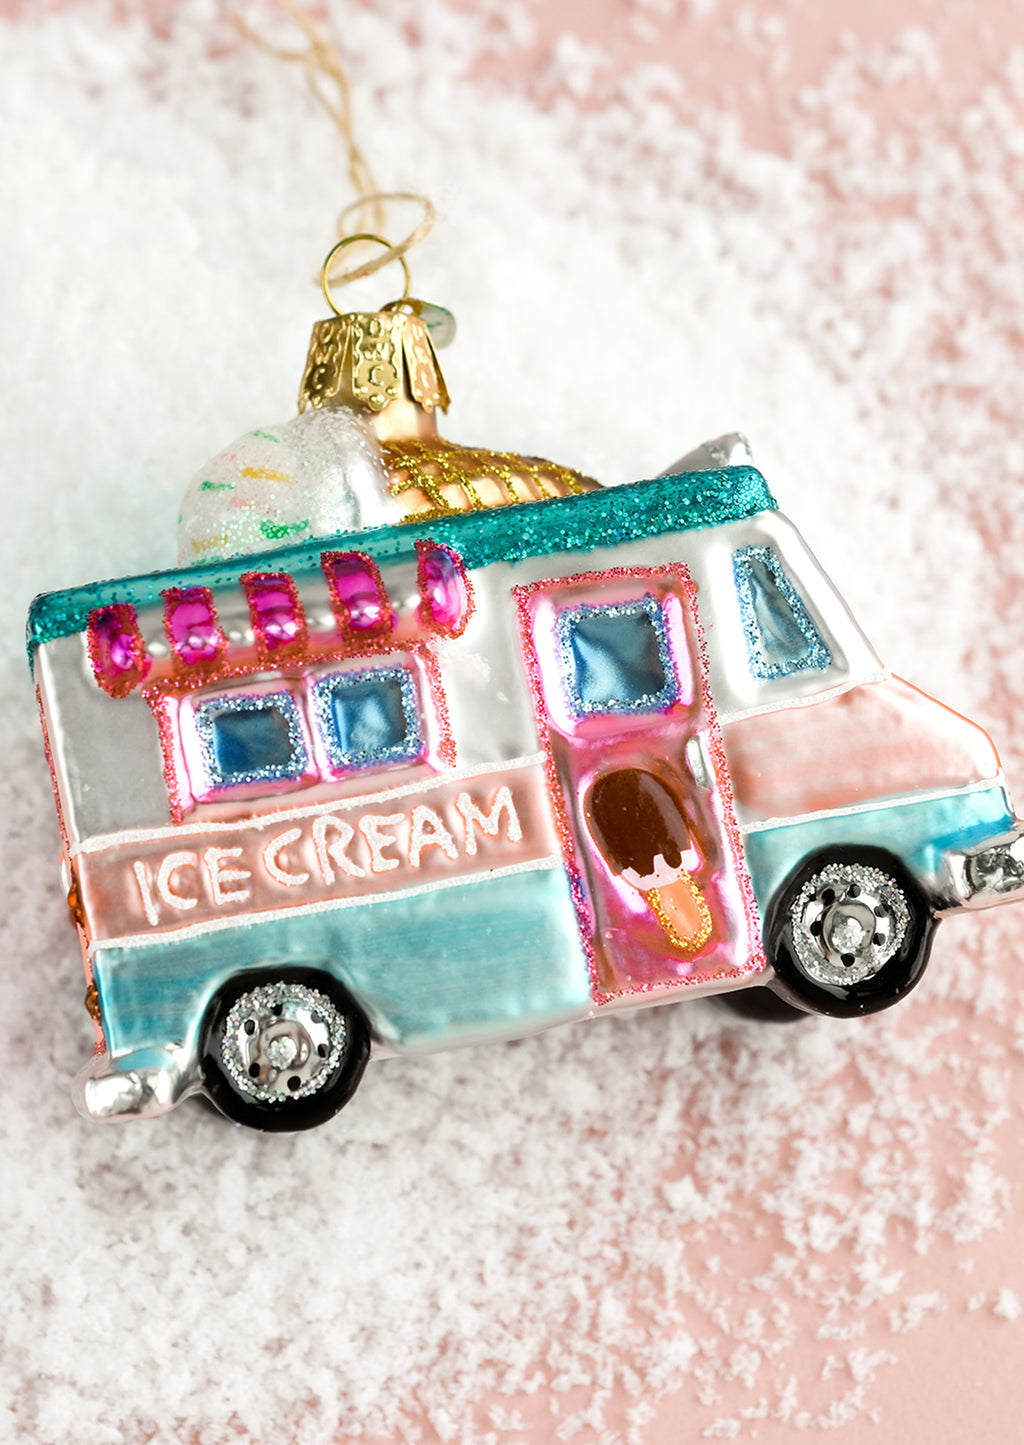 1: A holiday glass ornament of an ice cream truck.